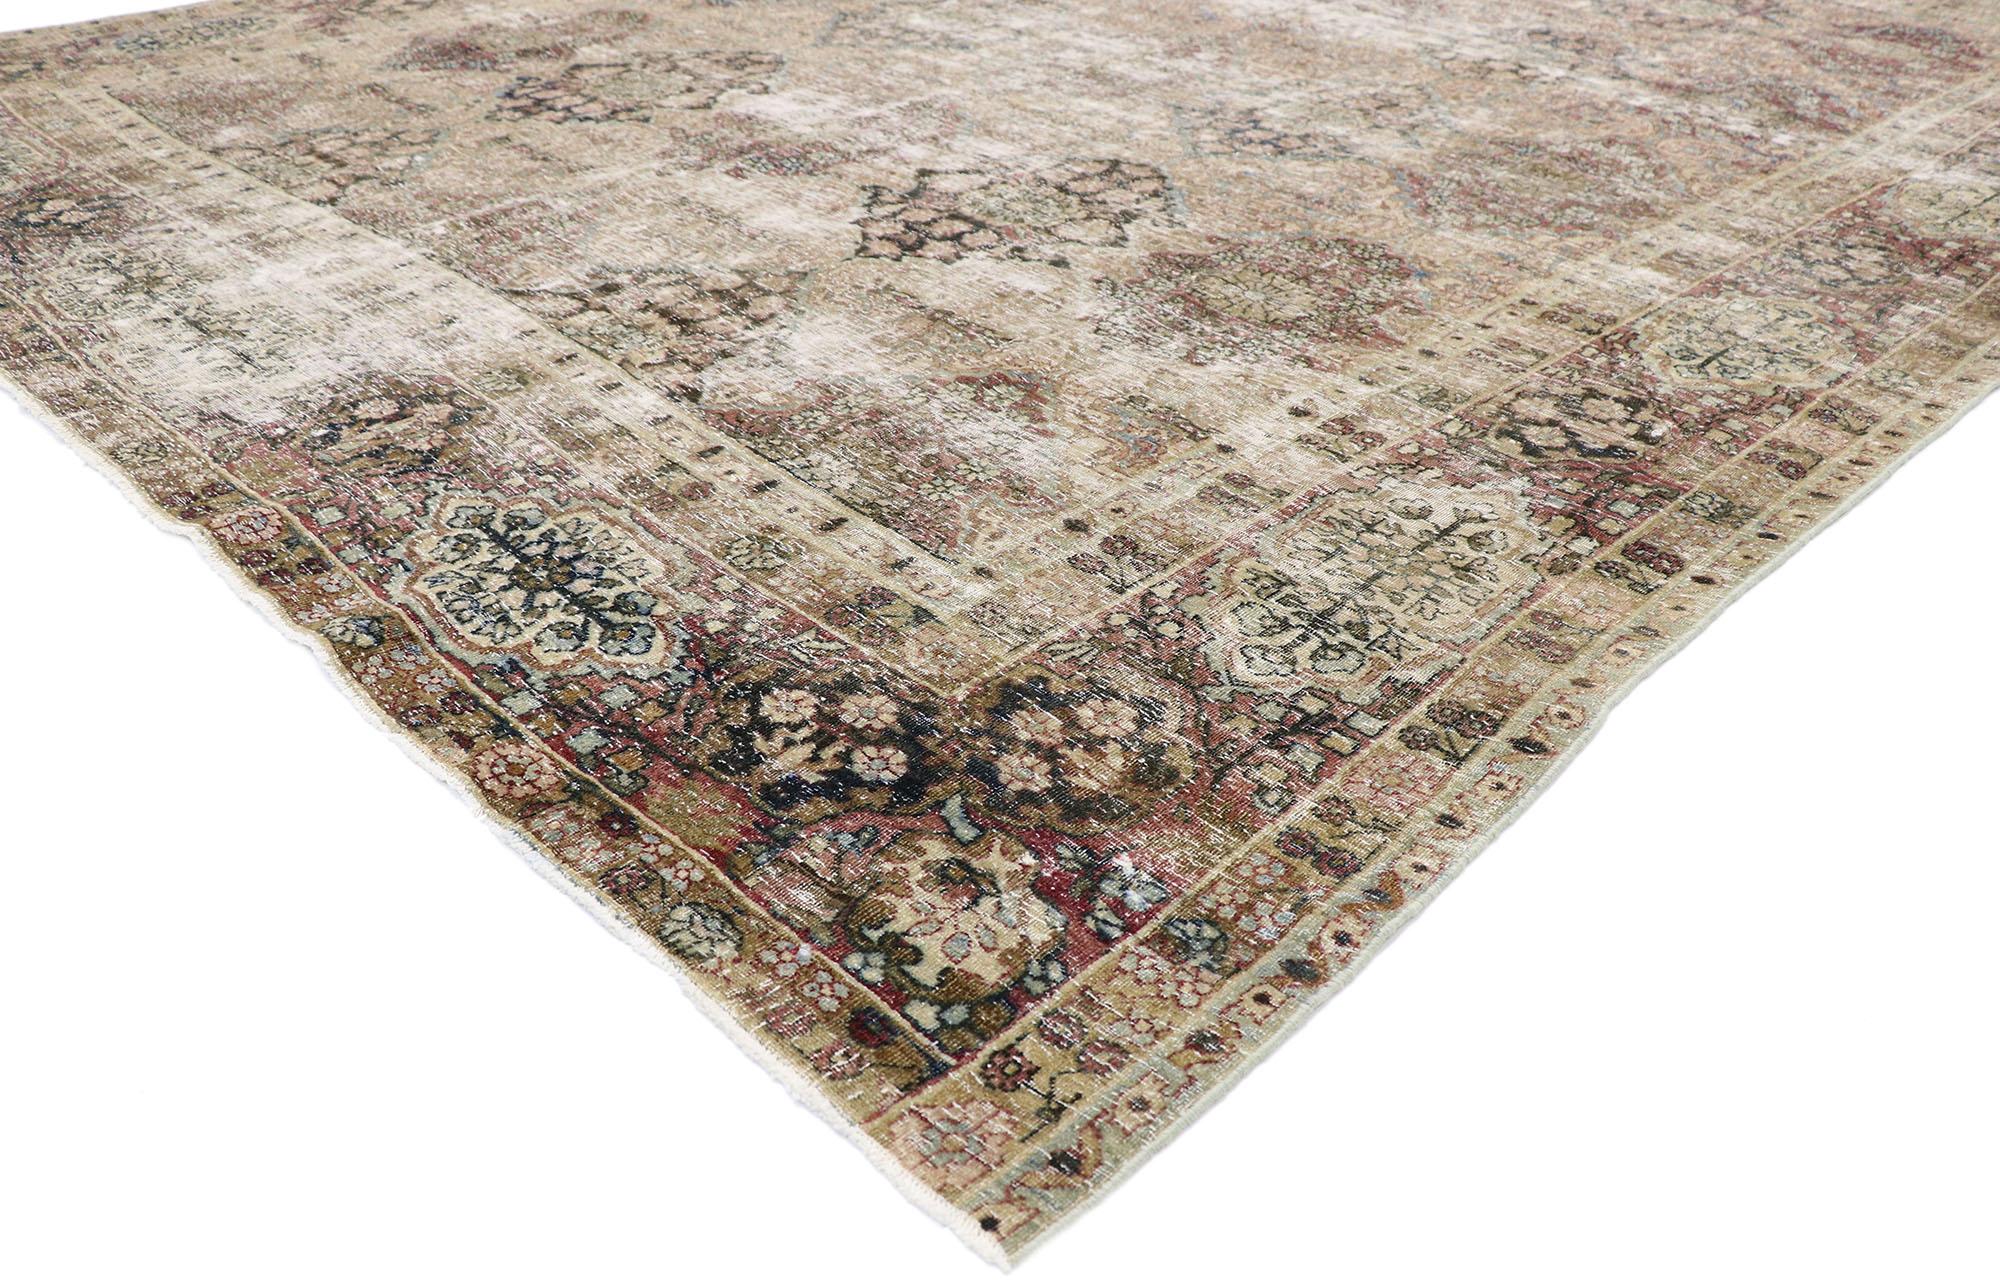 60837, distressed antique Persian Kerman rug with Rustic Renaissance style. Cleverly composed and distinctively well-balanced, this hand knotted wool distressed antique Persian Kerman rug will take on a curated lived-in look that feels timeless